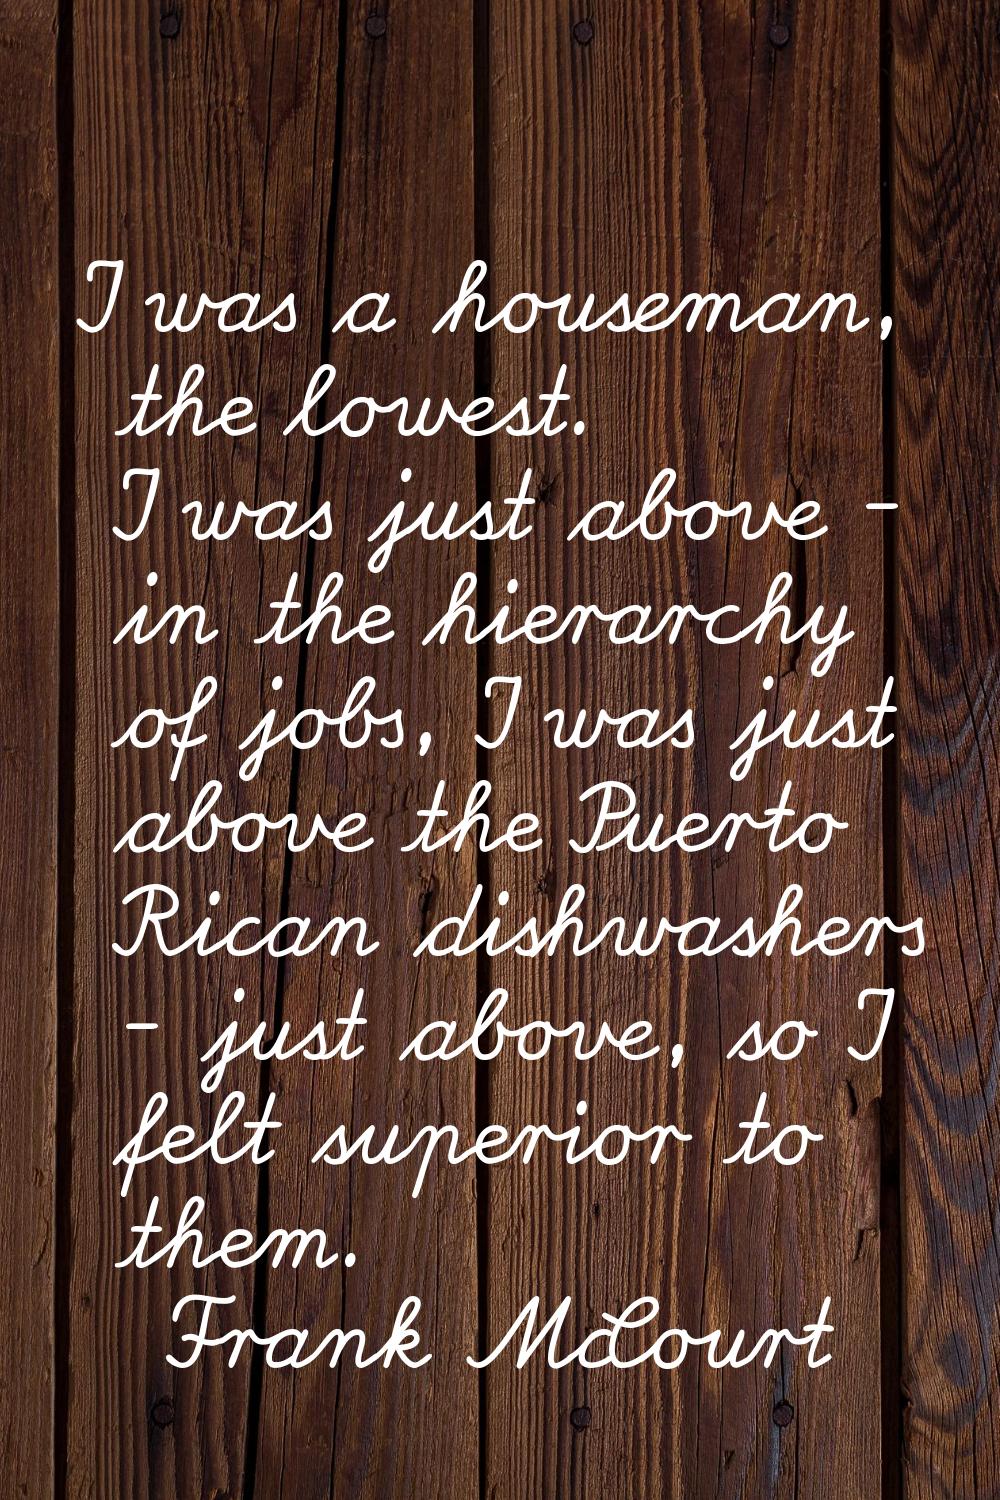 I was a houseman, the lowest. I was just above - in the hierarchy of jobs, I was just above the Pue